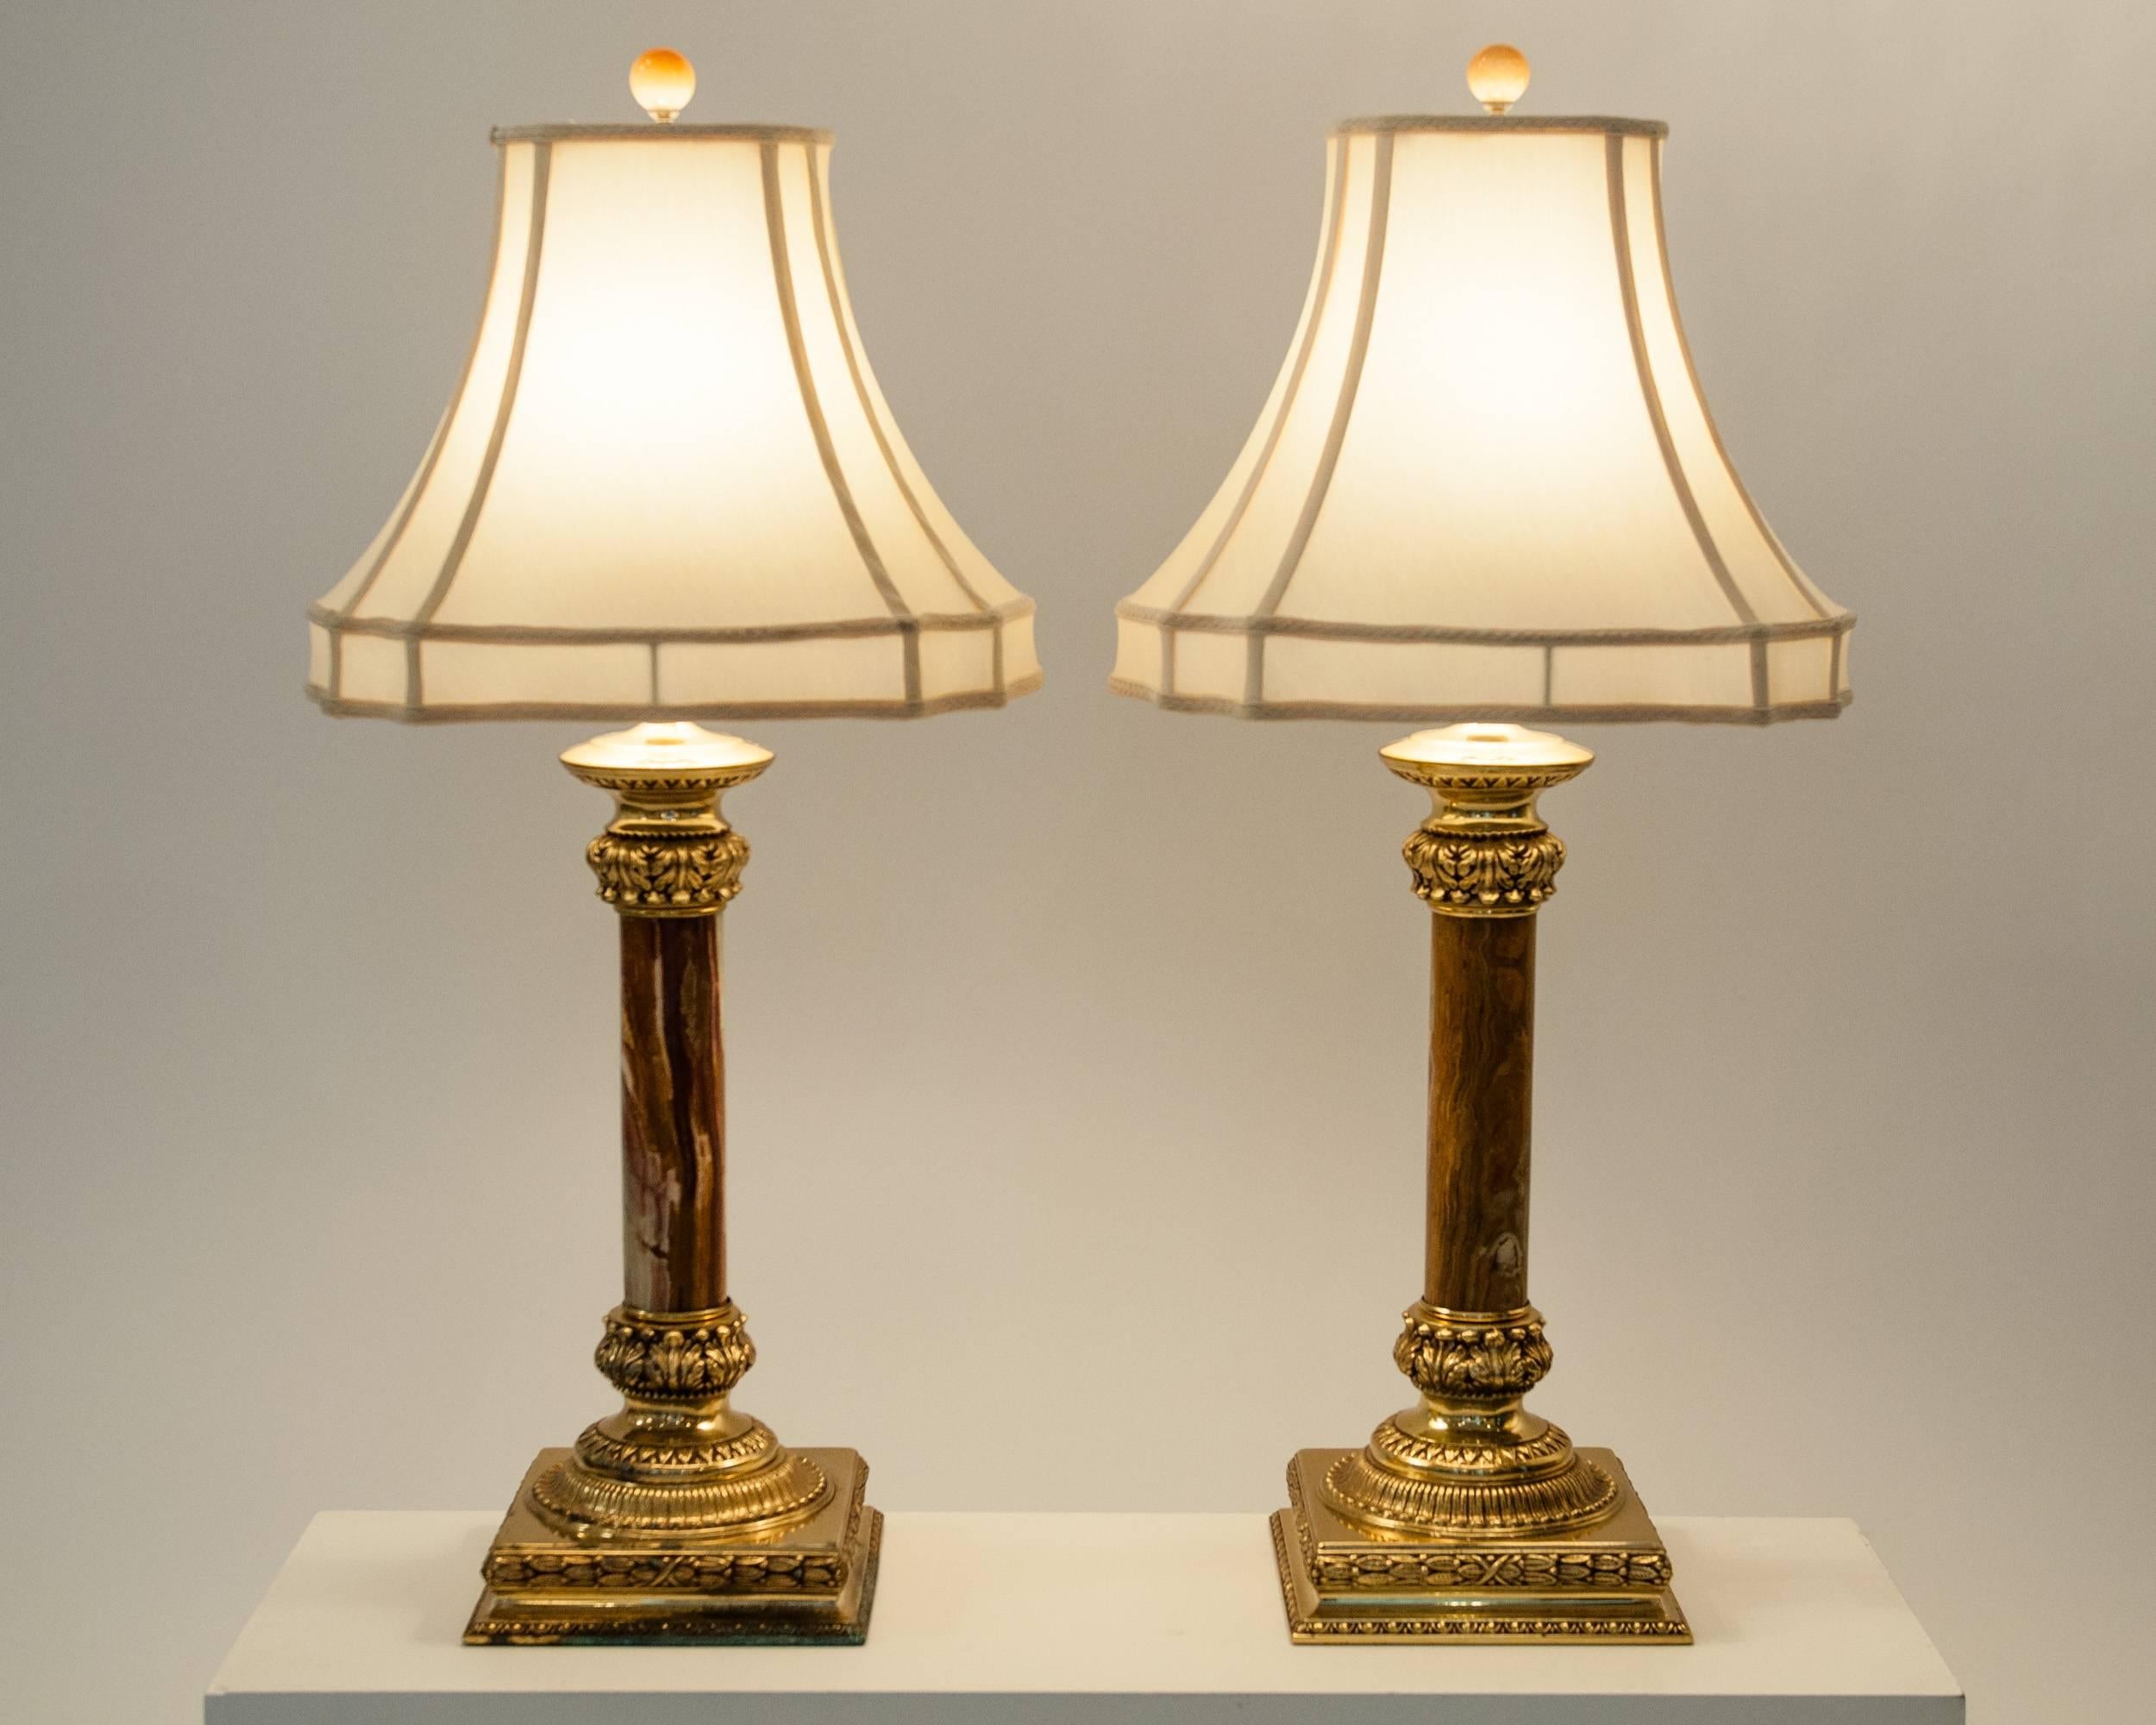 Antique pair of Jade table lamps with solid brass base with design details. The lamps come with 100% silk bell shade. Each lamp measure 34 inches high x 7.5 inches width base. Each shade measure 6